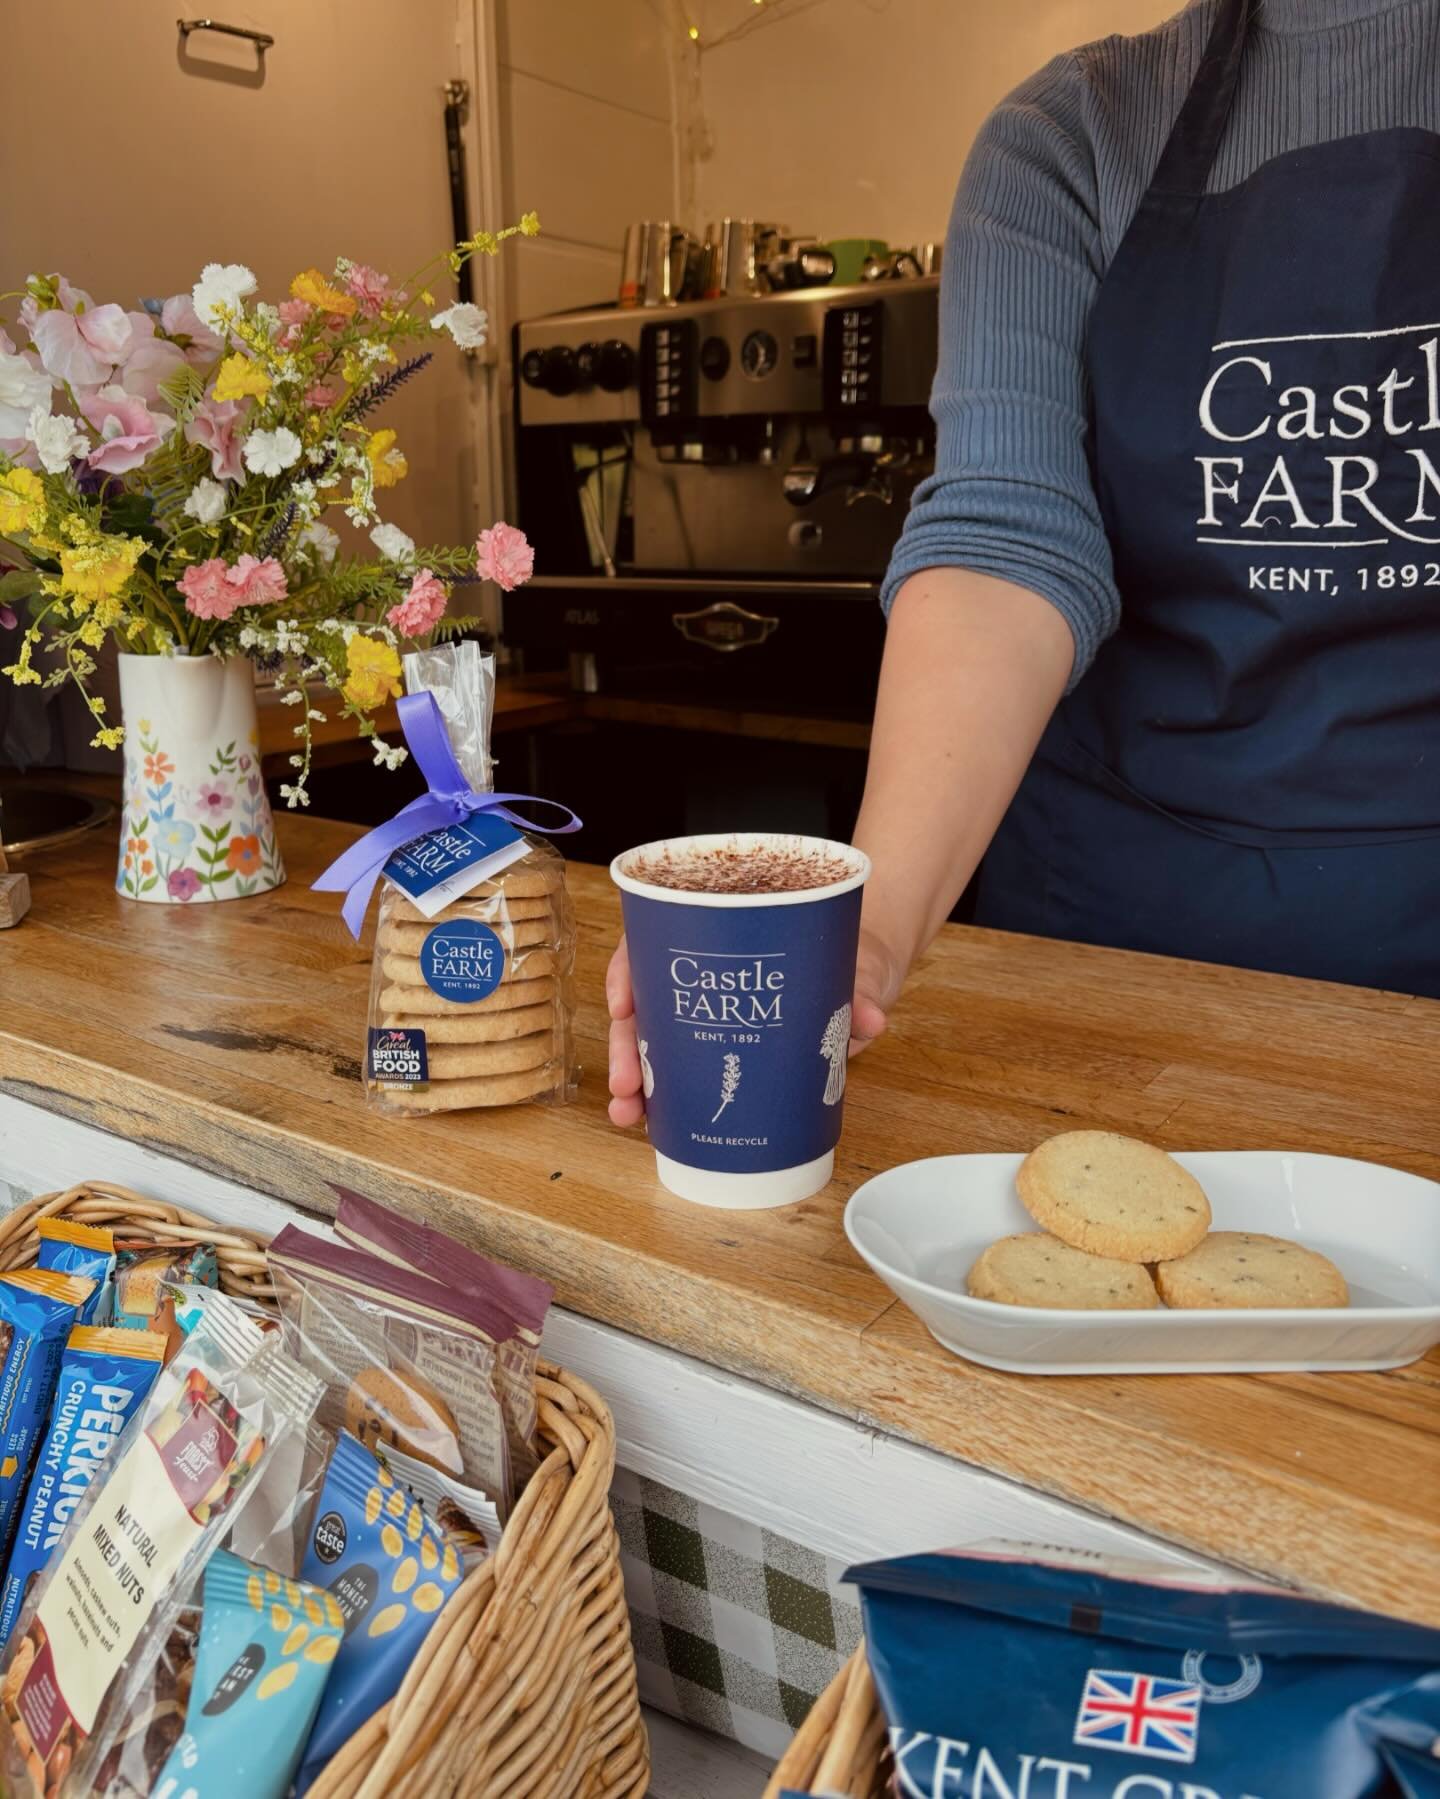 A TREAT ON US ✨ || All long bank holiday weekend you can enjoy a complimentary Lavender Shortbread Biscuit when you order any hot drink from the from the Castle Farm Coffee Cart! 💜🙌🏼💜

So if you are walking the valley, or looking for a family tri